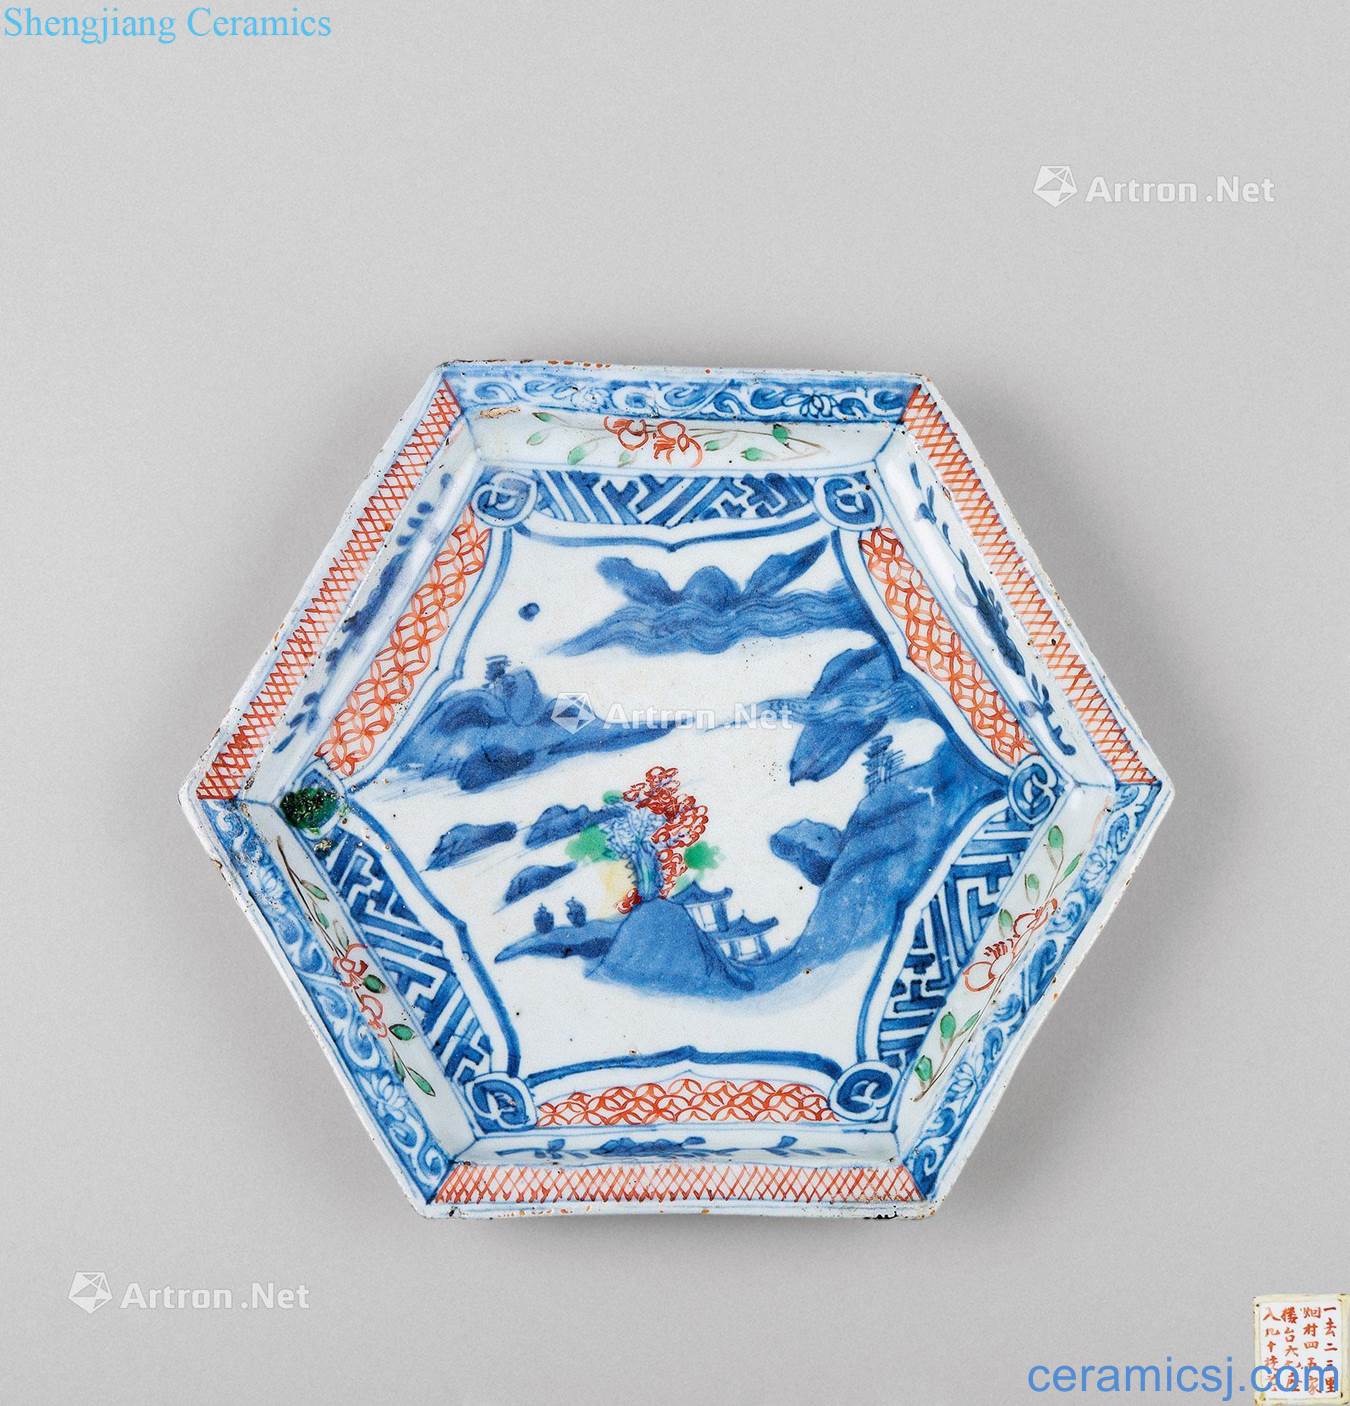 The late Ming dynasty (1583-1644) apocalypse three-color landscape scenery lines hexagonal plates